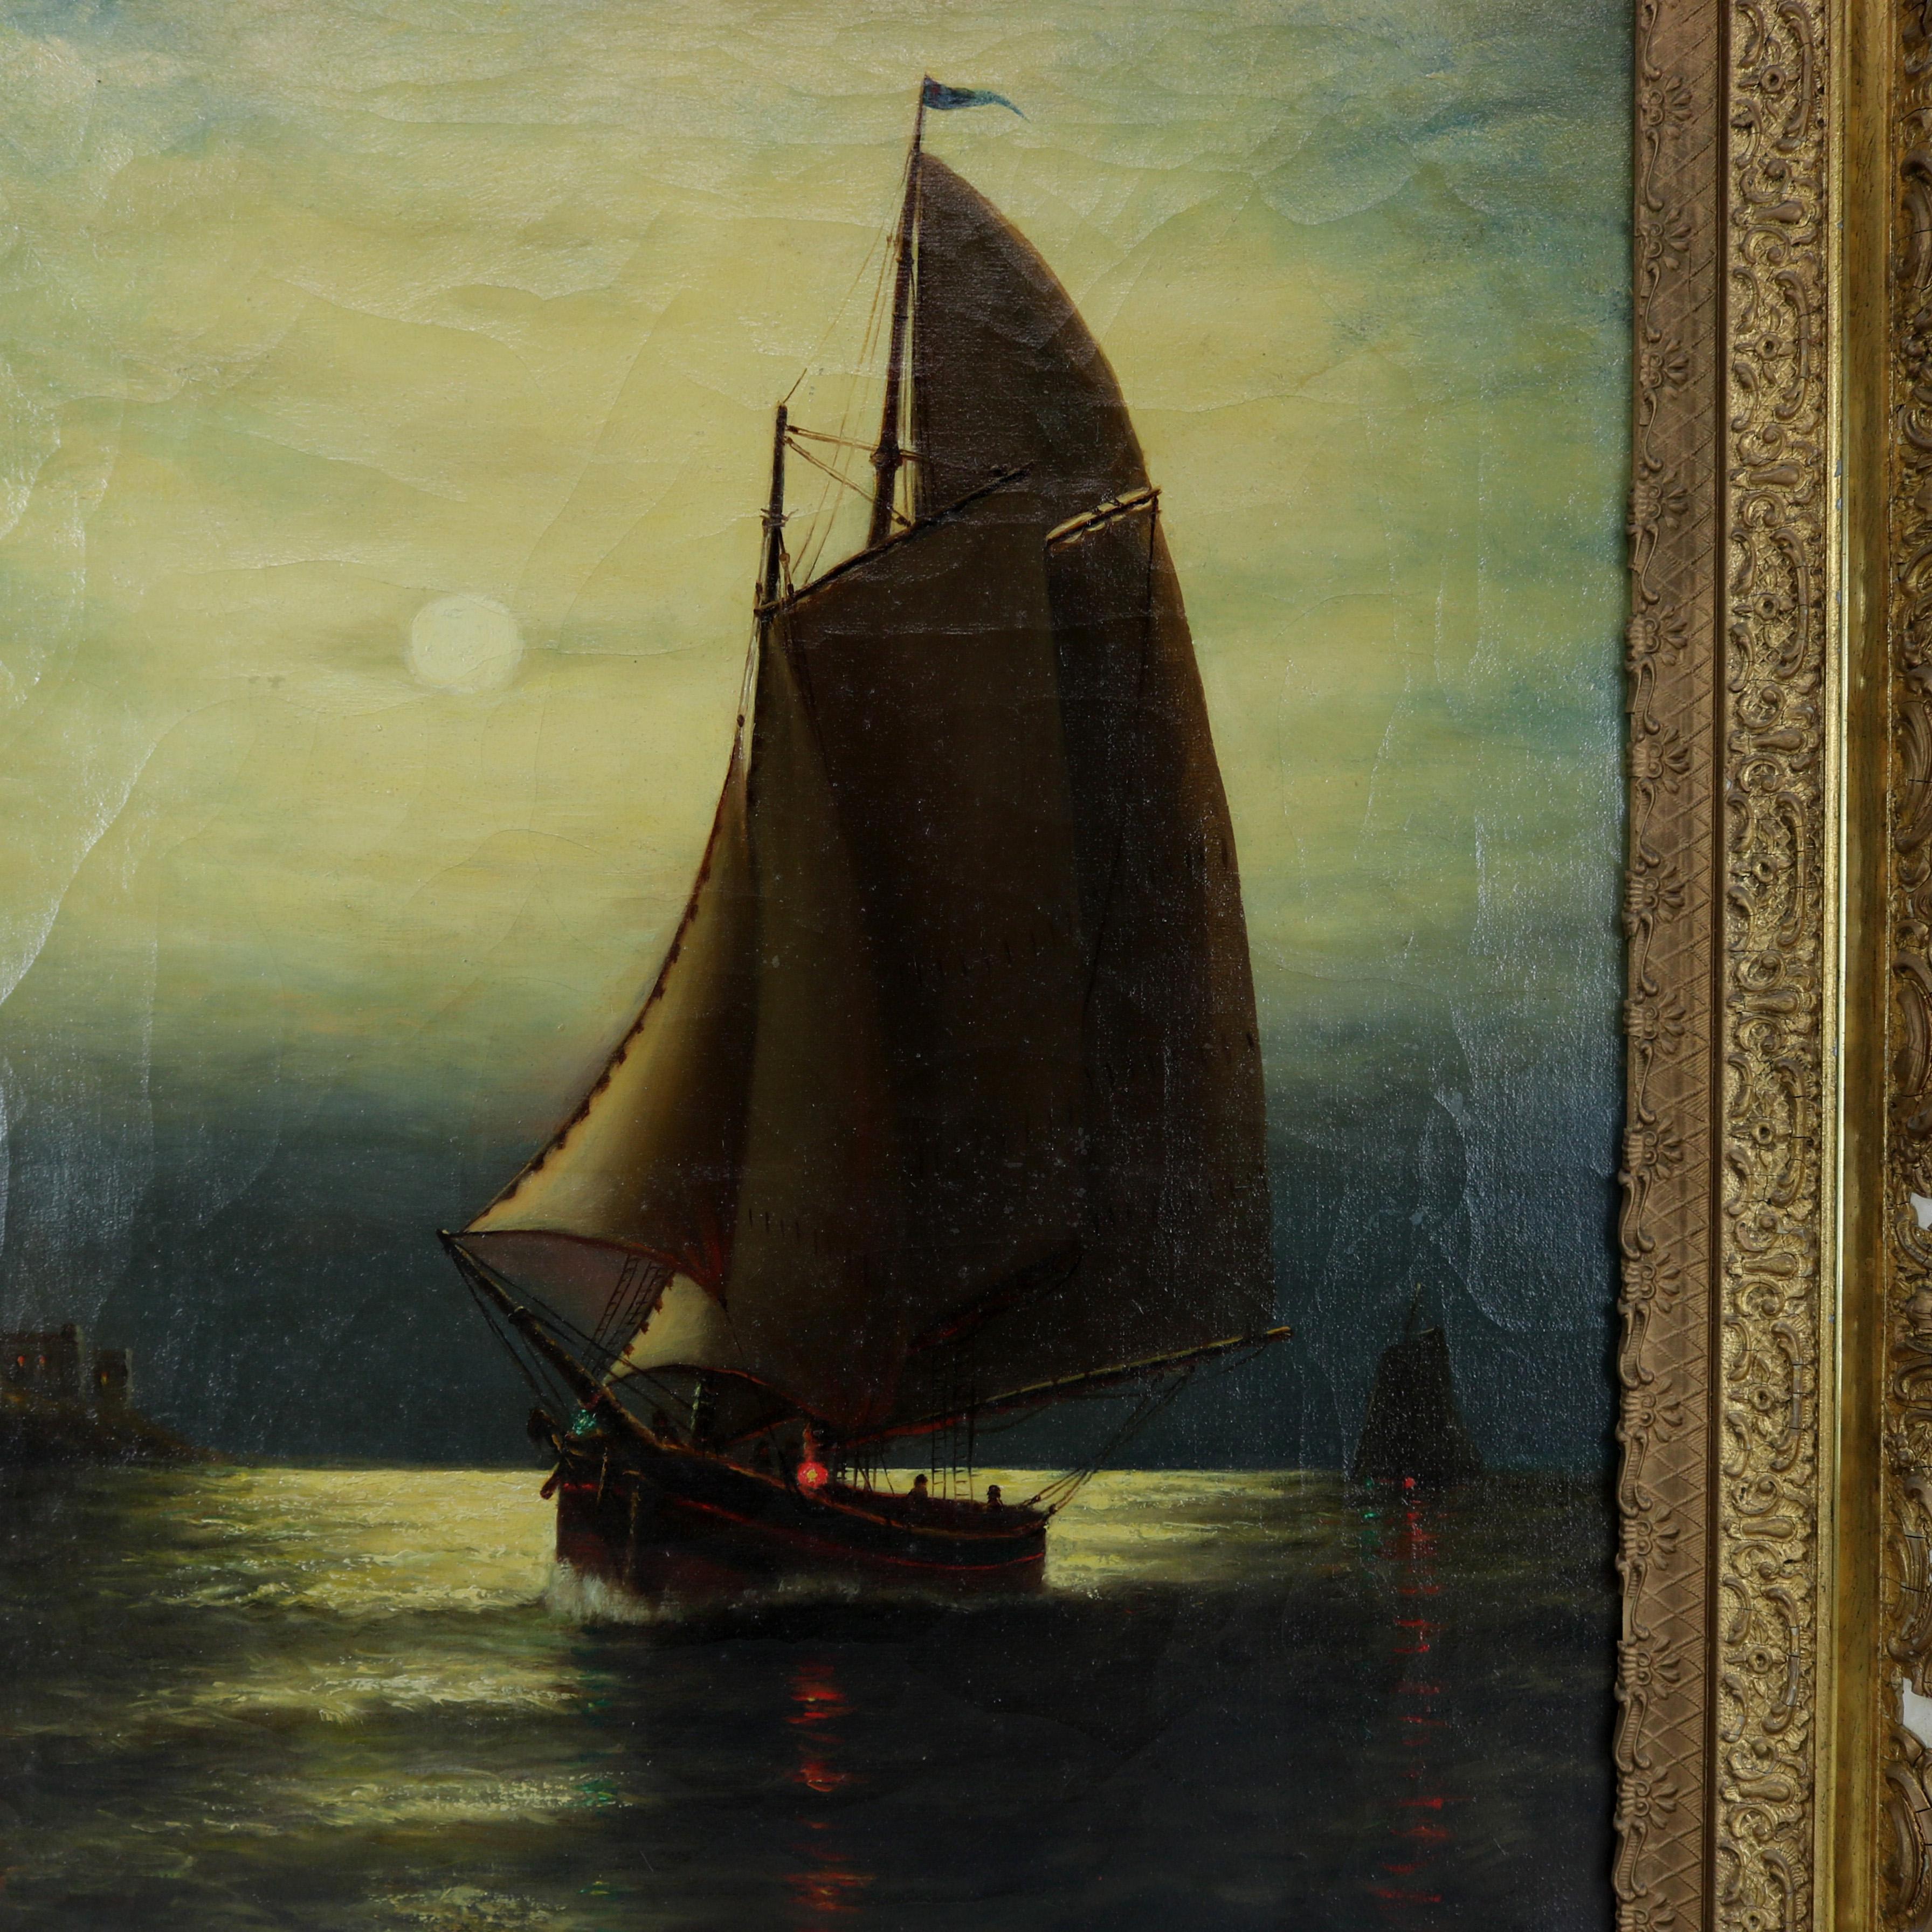 Antique maritime oil on canvas painting depicts moonlit nautical seascape scene with sailboat signed Wesley Webber, seated in giltwood frame, circa 1900.

Measures: 31.25